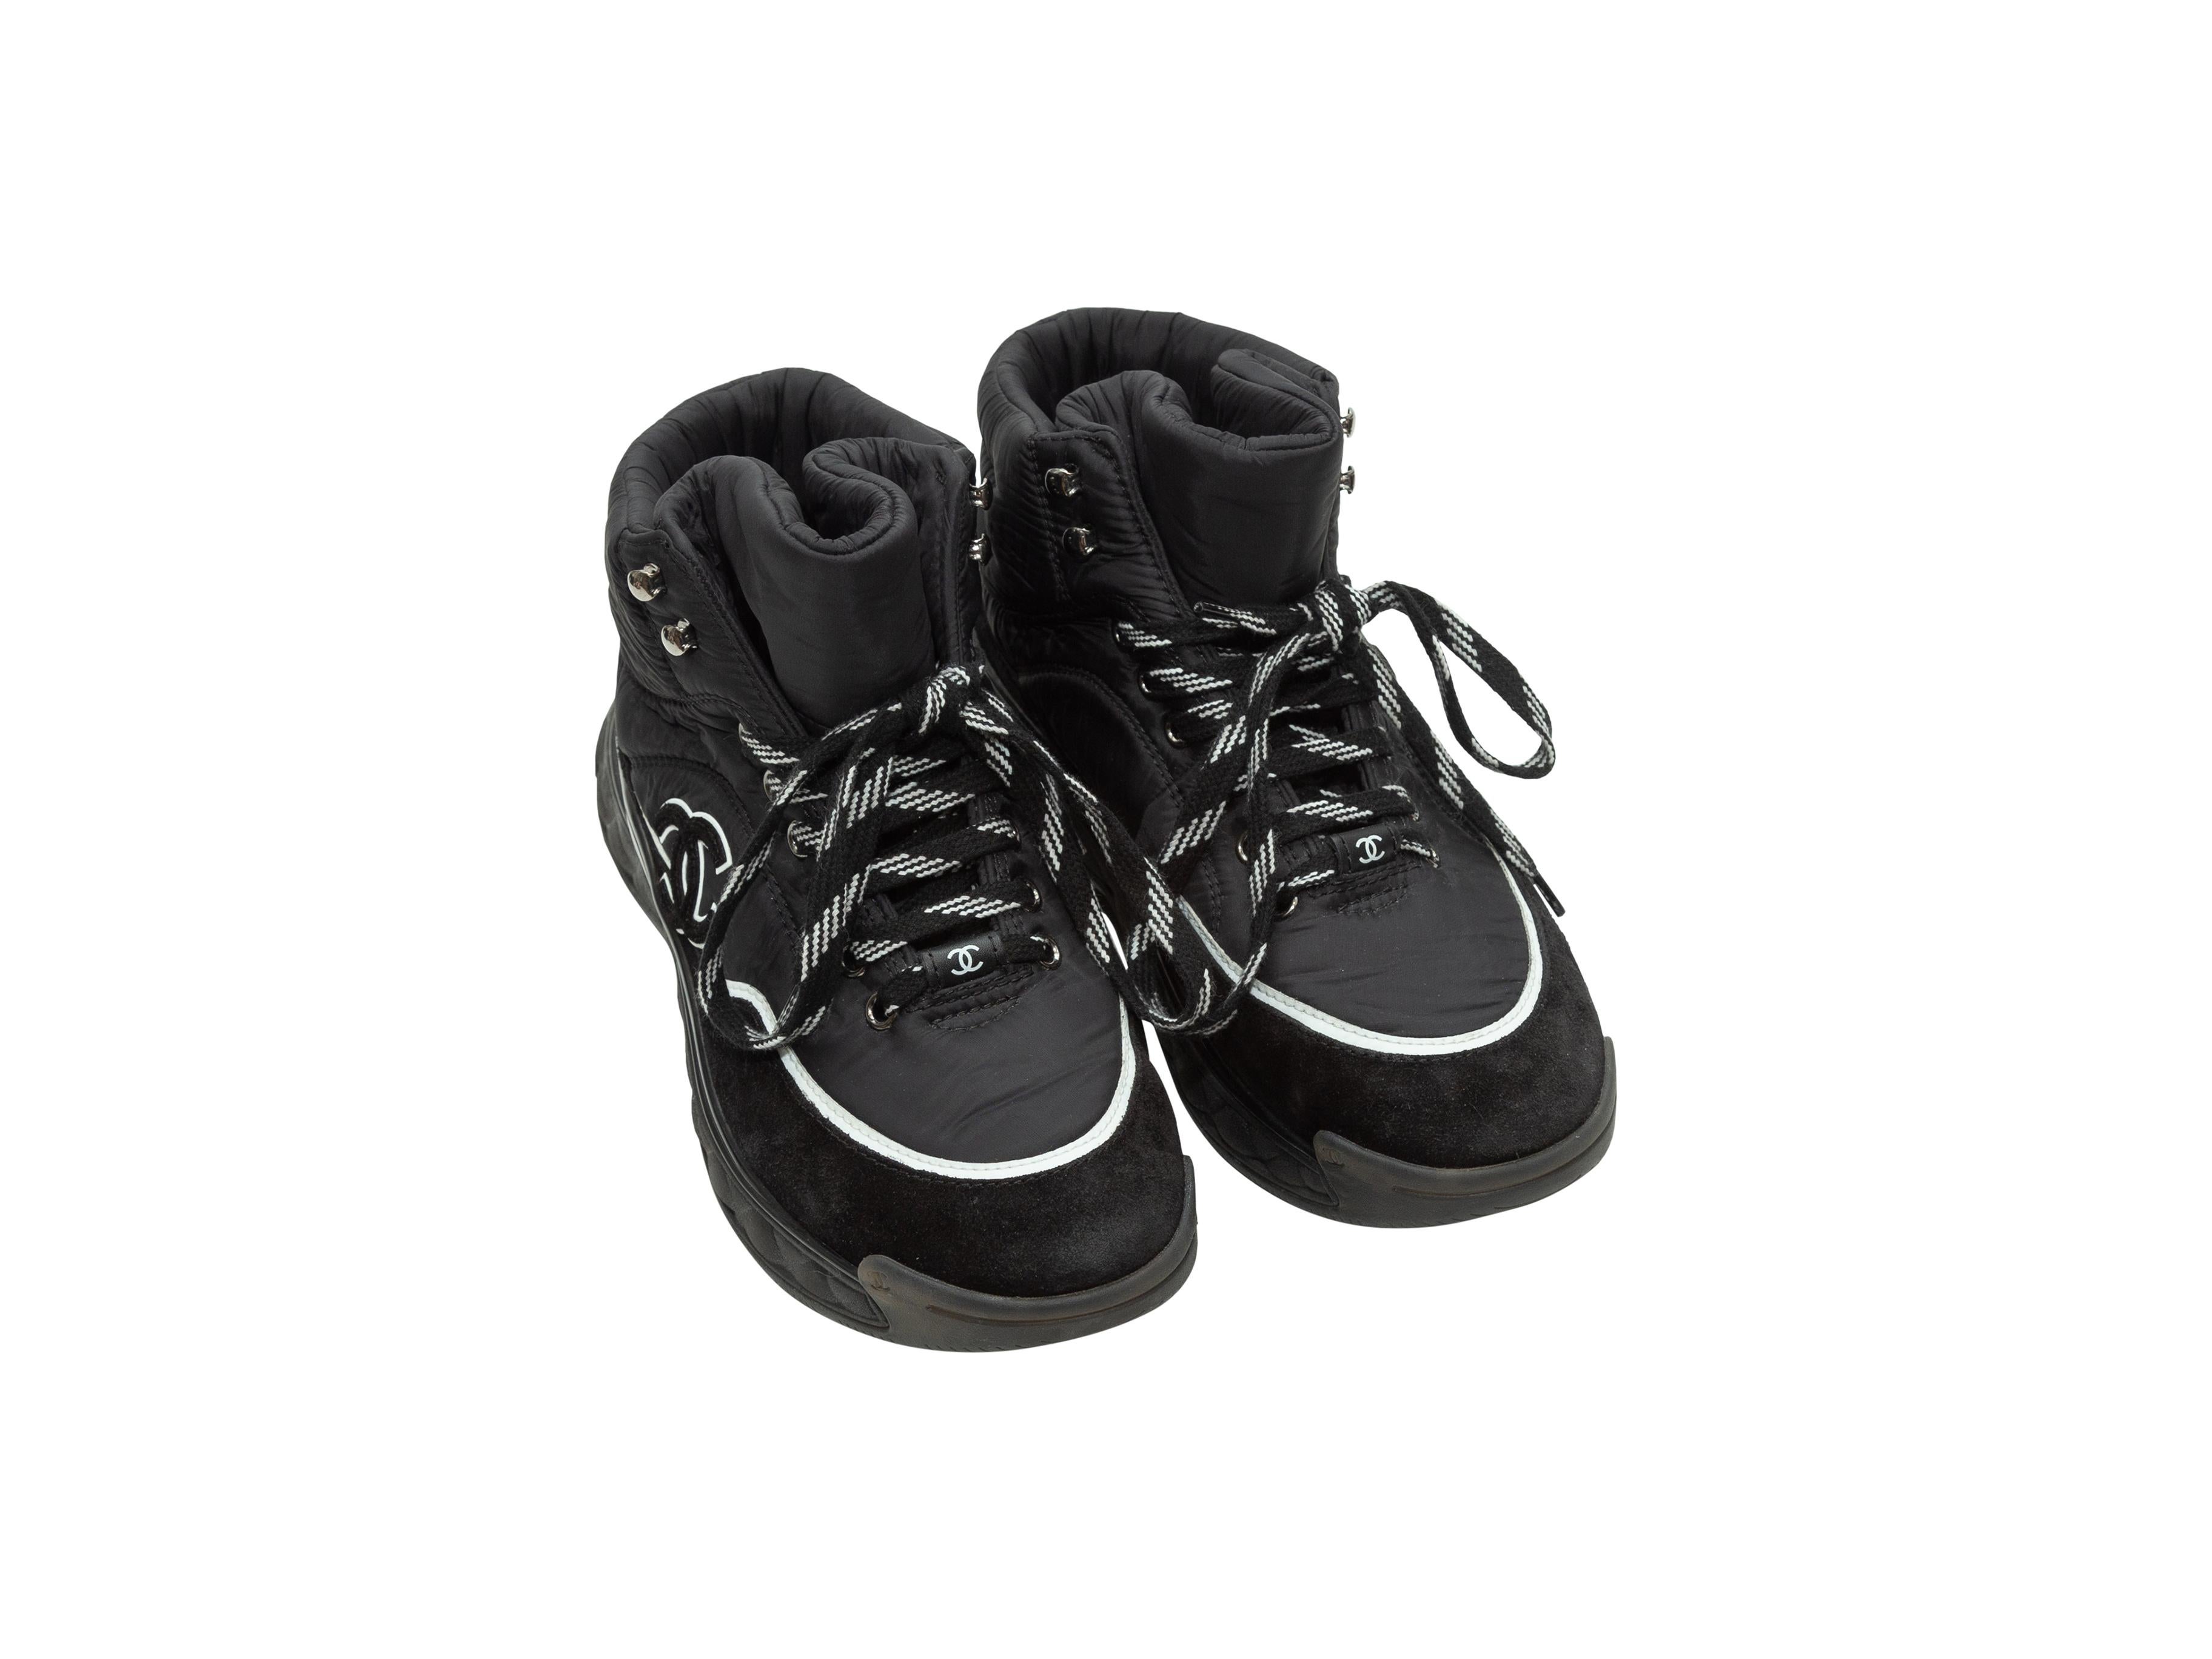 Product details: Black high-top platform sneakers by Chanel. Contrast white trim. Suede and nylon panels throughout. Lace-up tie closures at tops. Designer size 38.5. 1.5